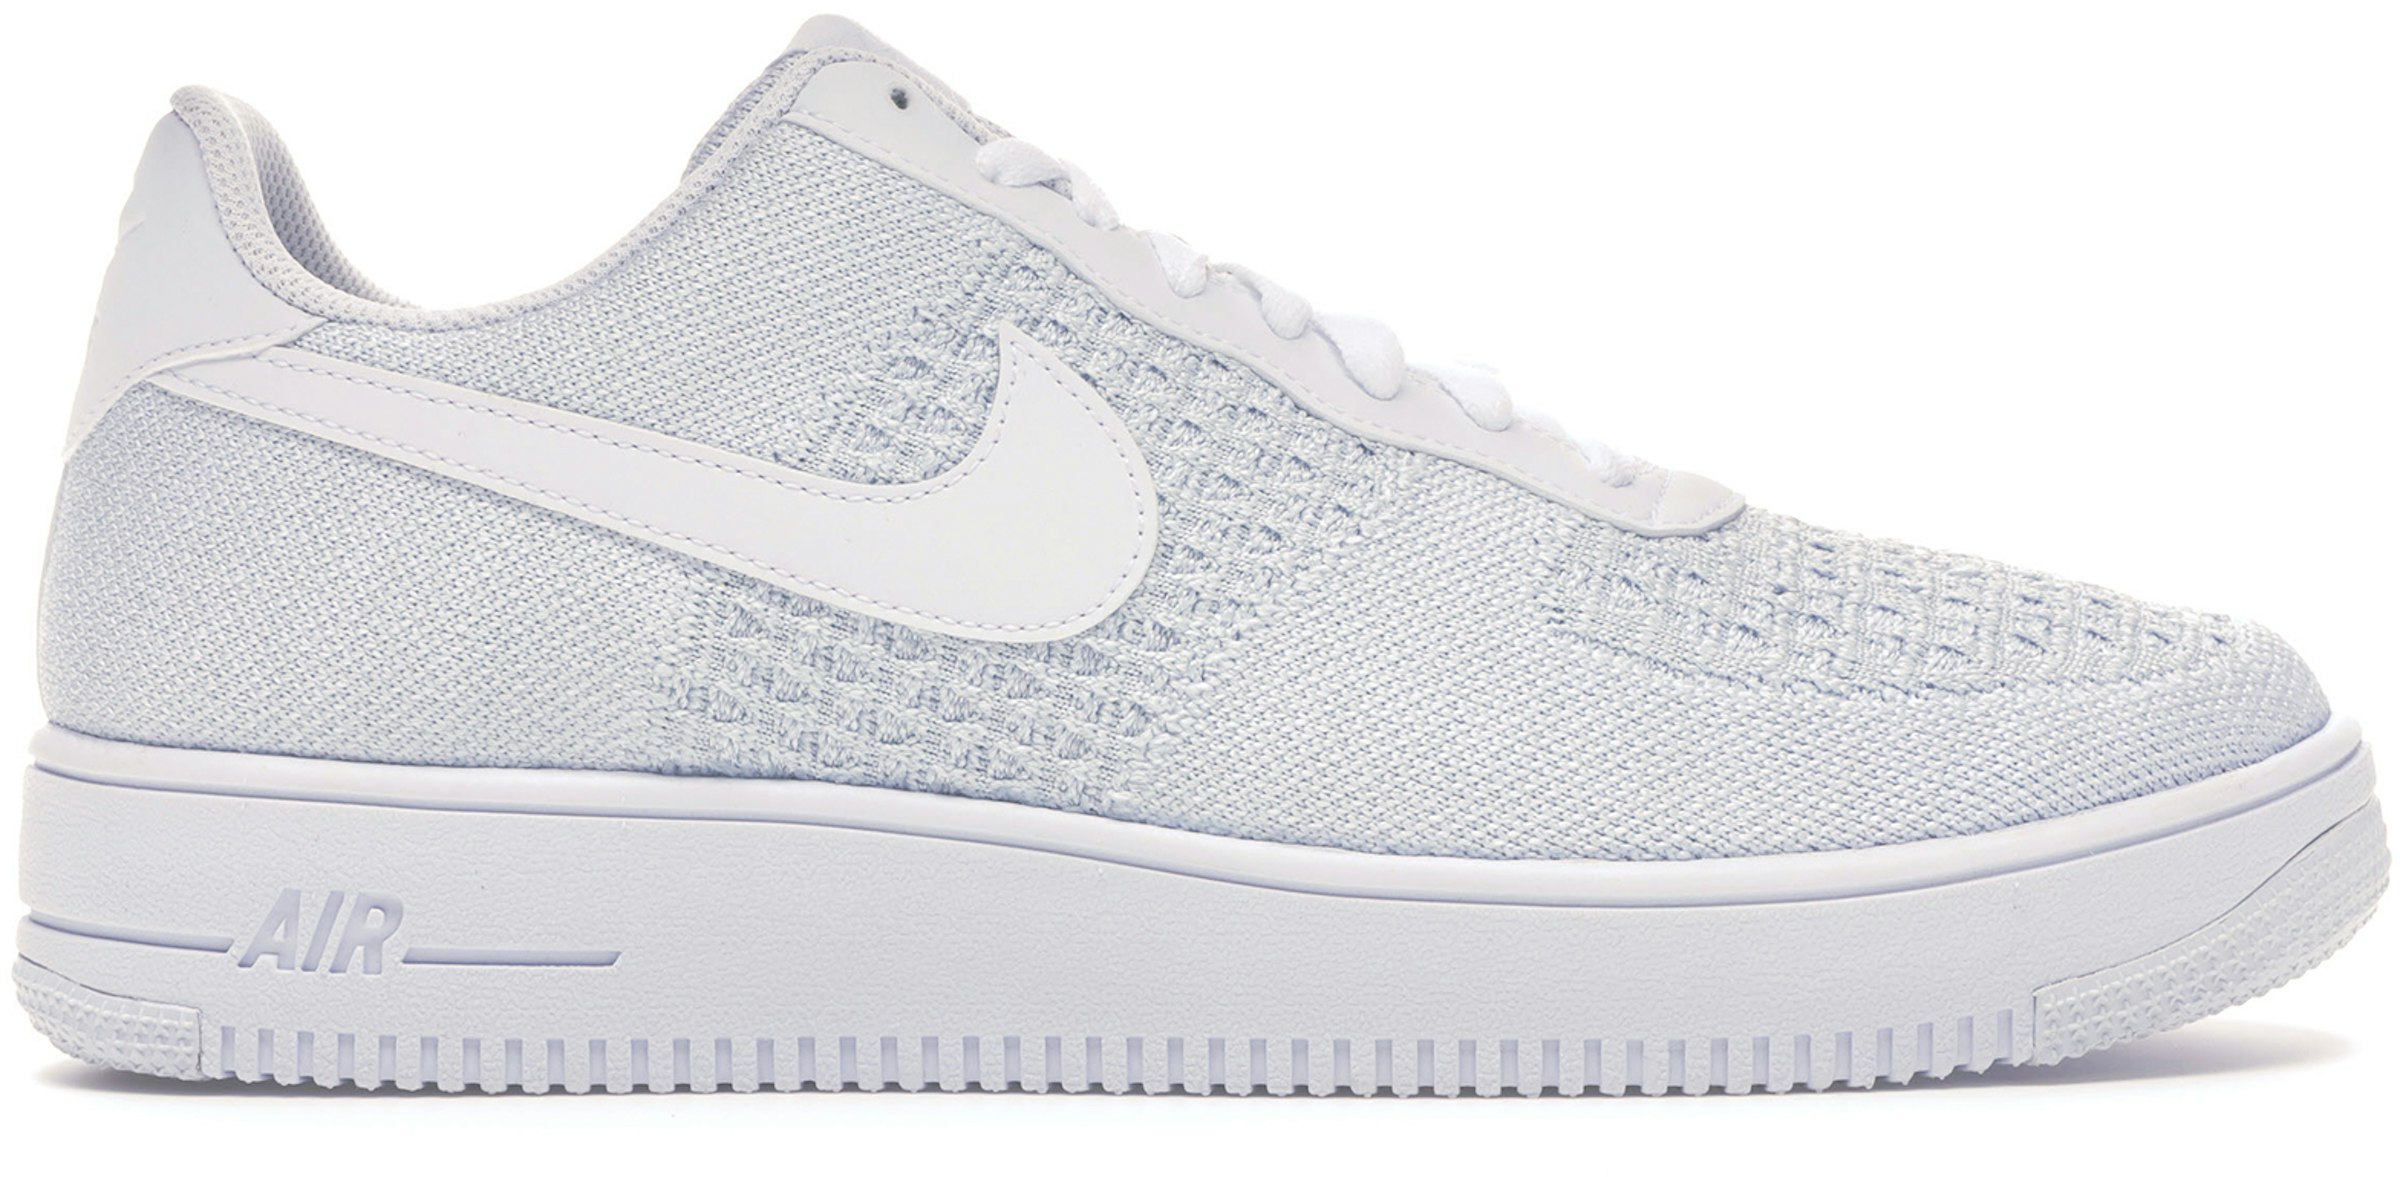 Nike Air Force Flyknit White Pure Platinum Hombre - ES